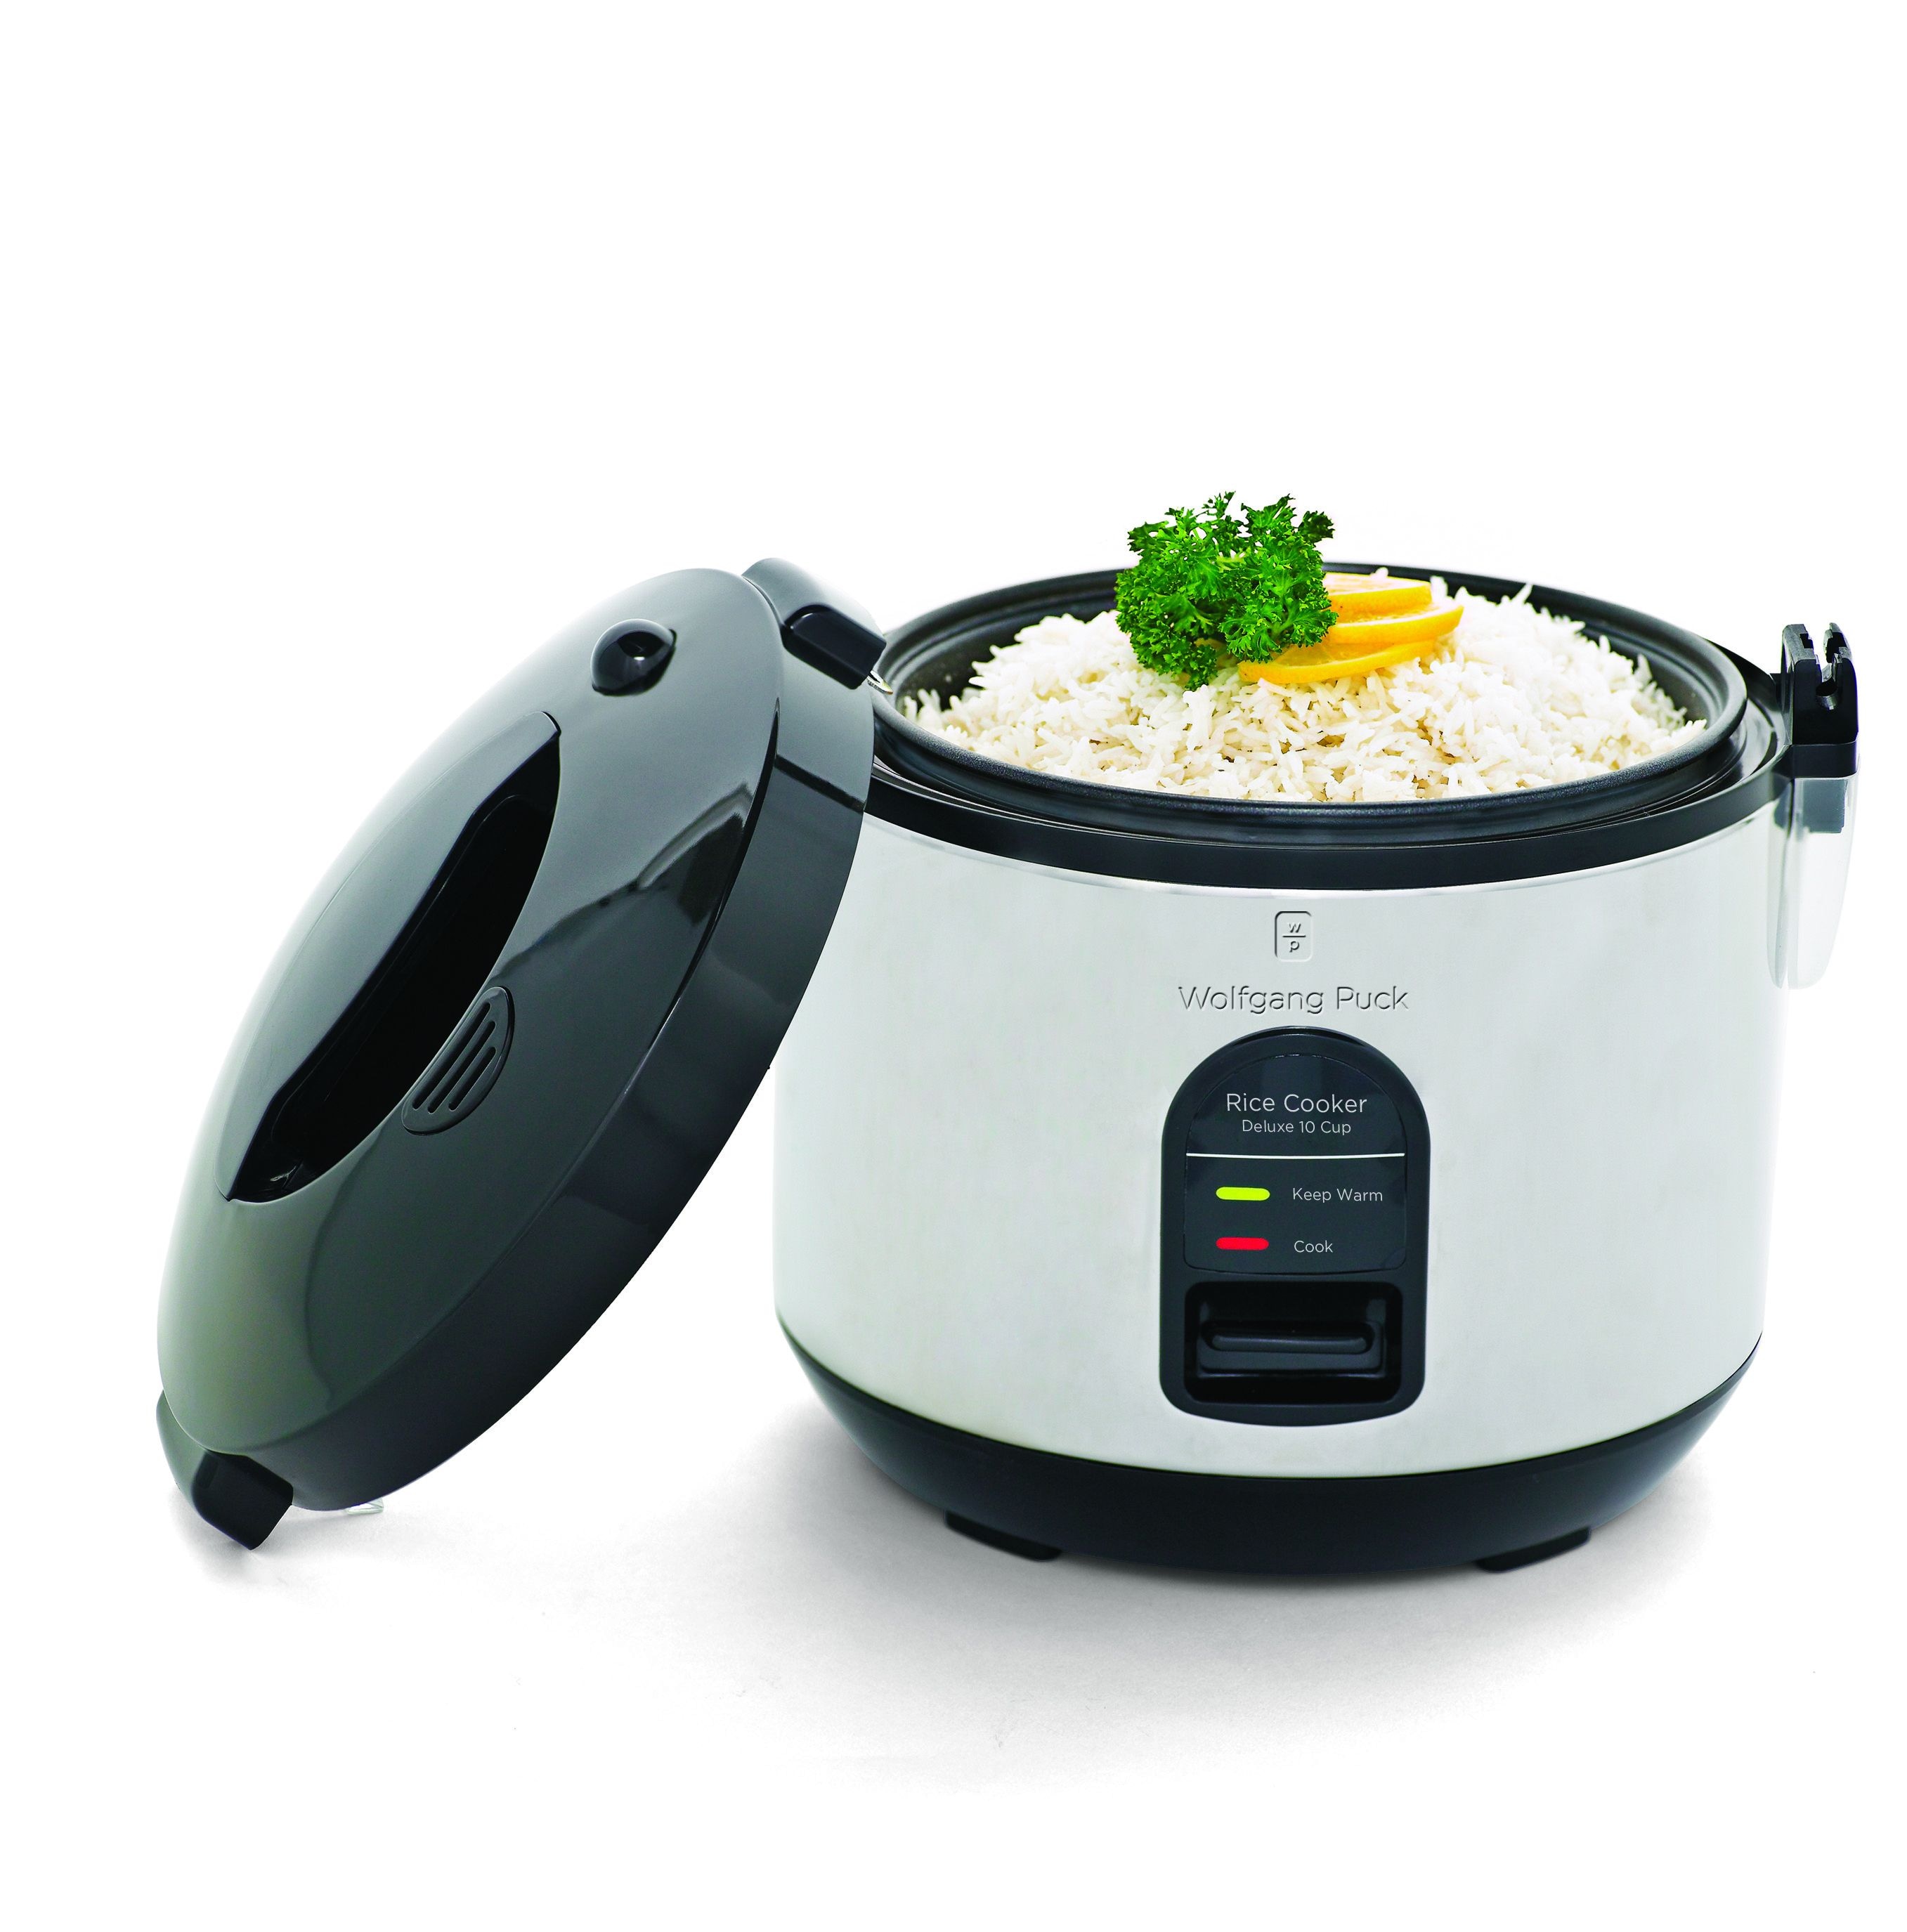 Wolfgang Puck 7 cup Stainless Steel Steamer and Rice Cooker Bistro  Collection